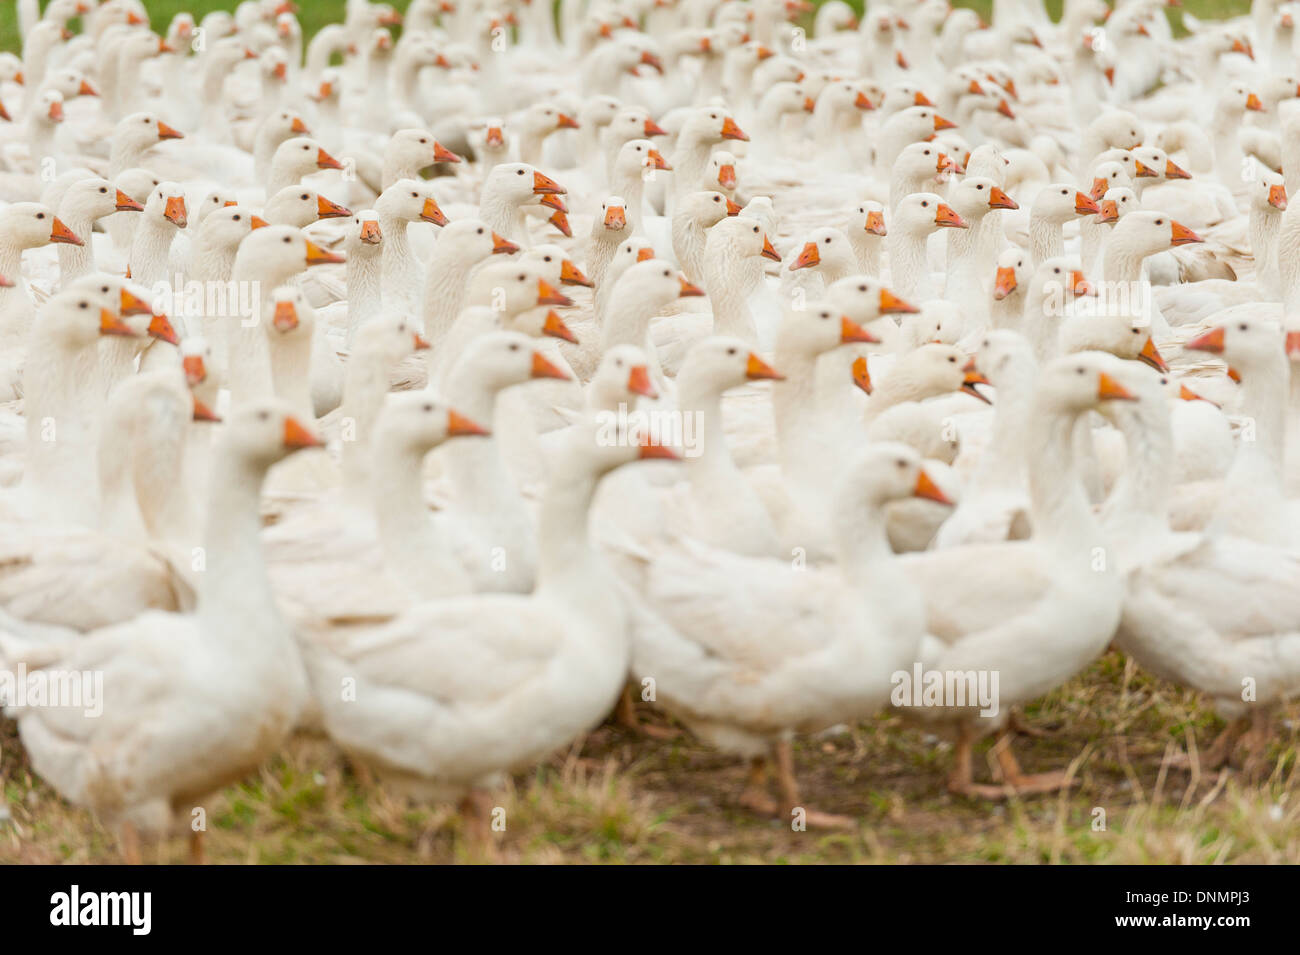 Herd of famous geese from Koluda, Poland Stock Photo